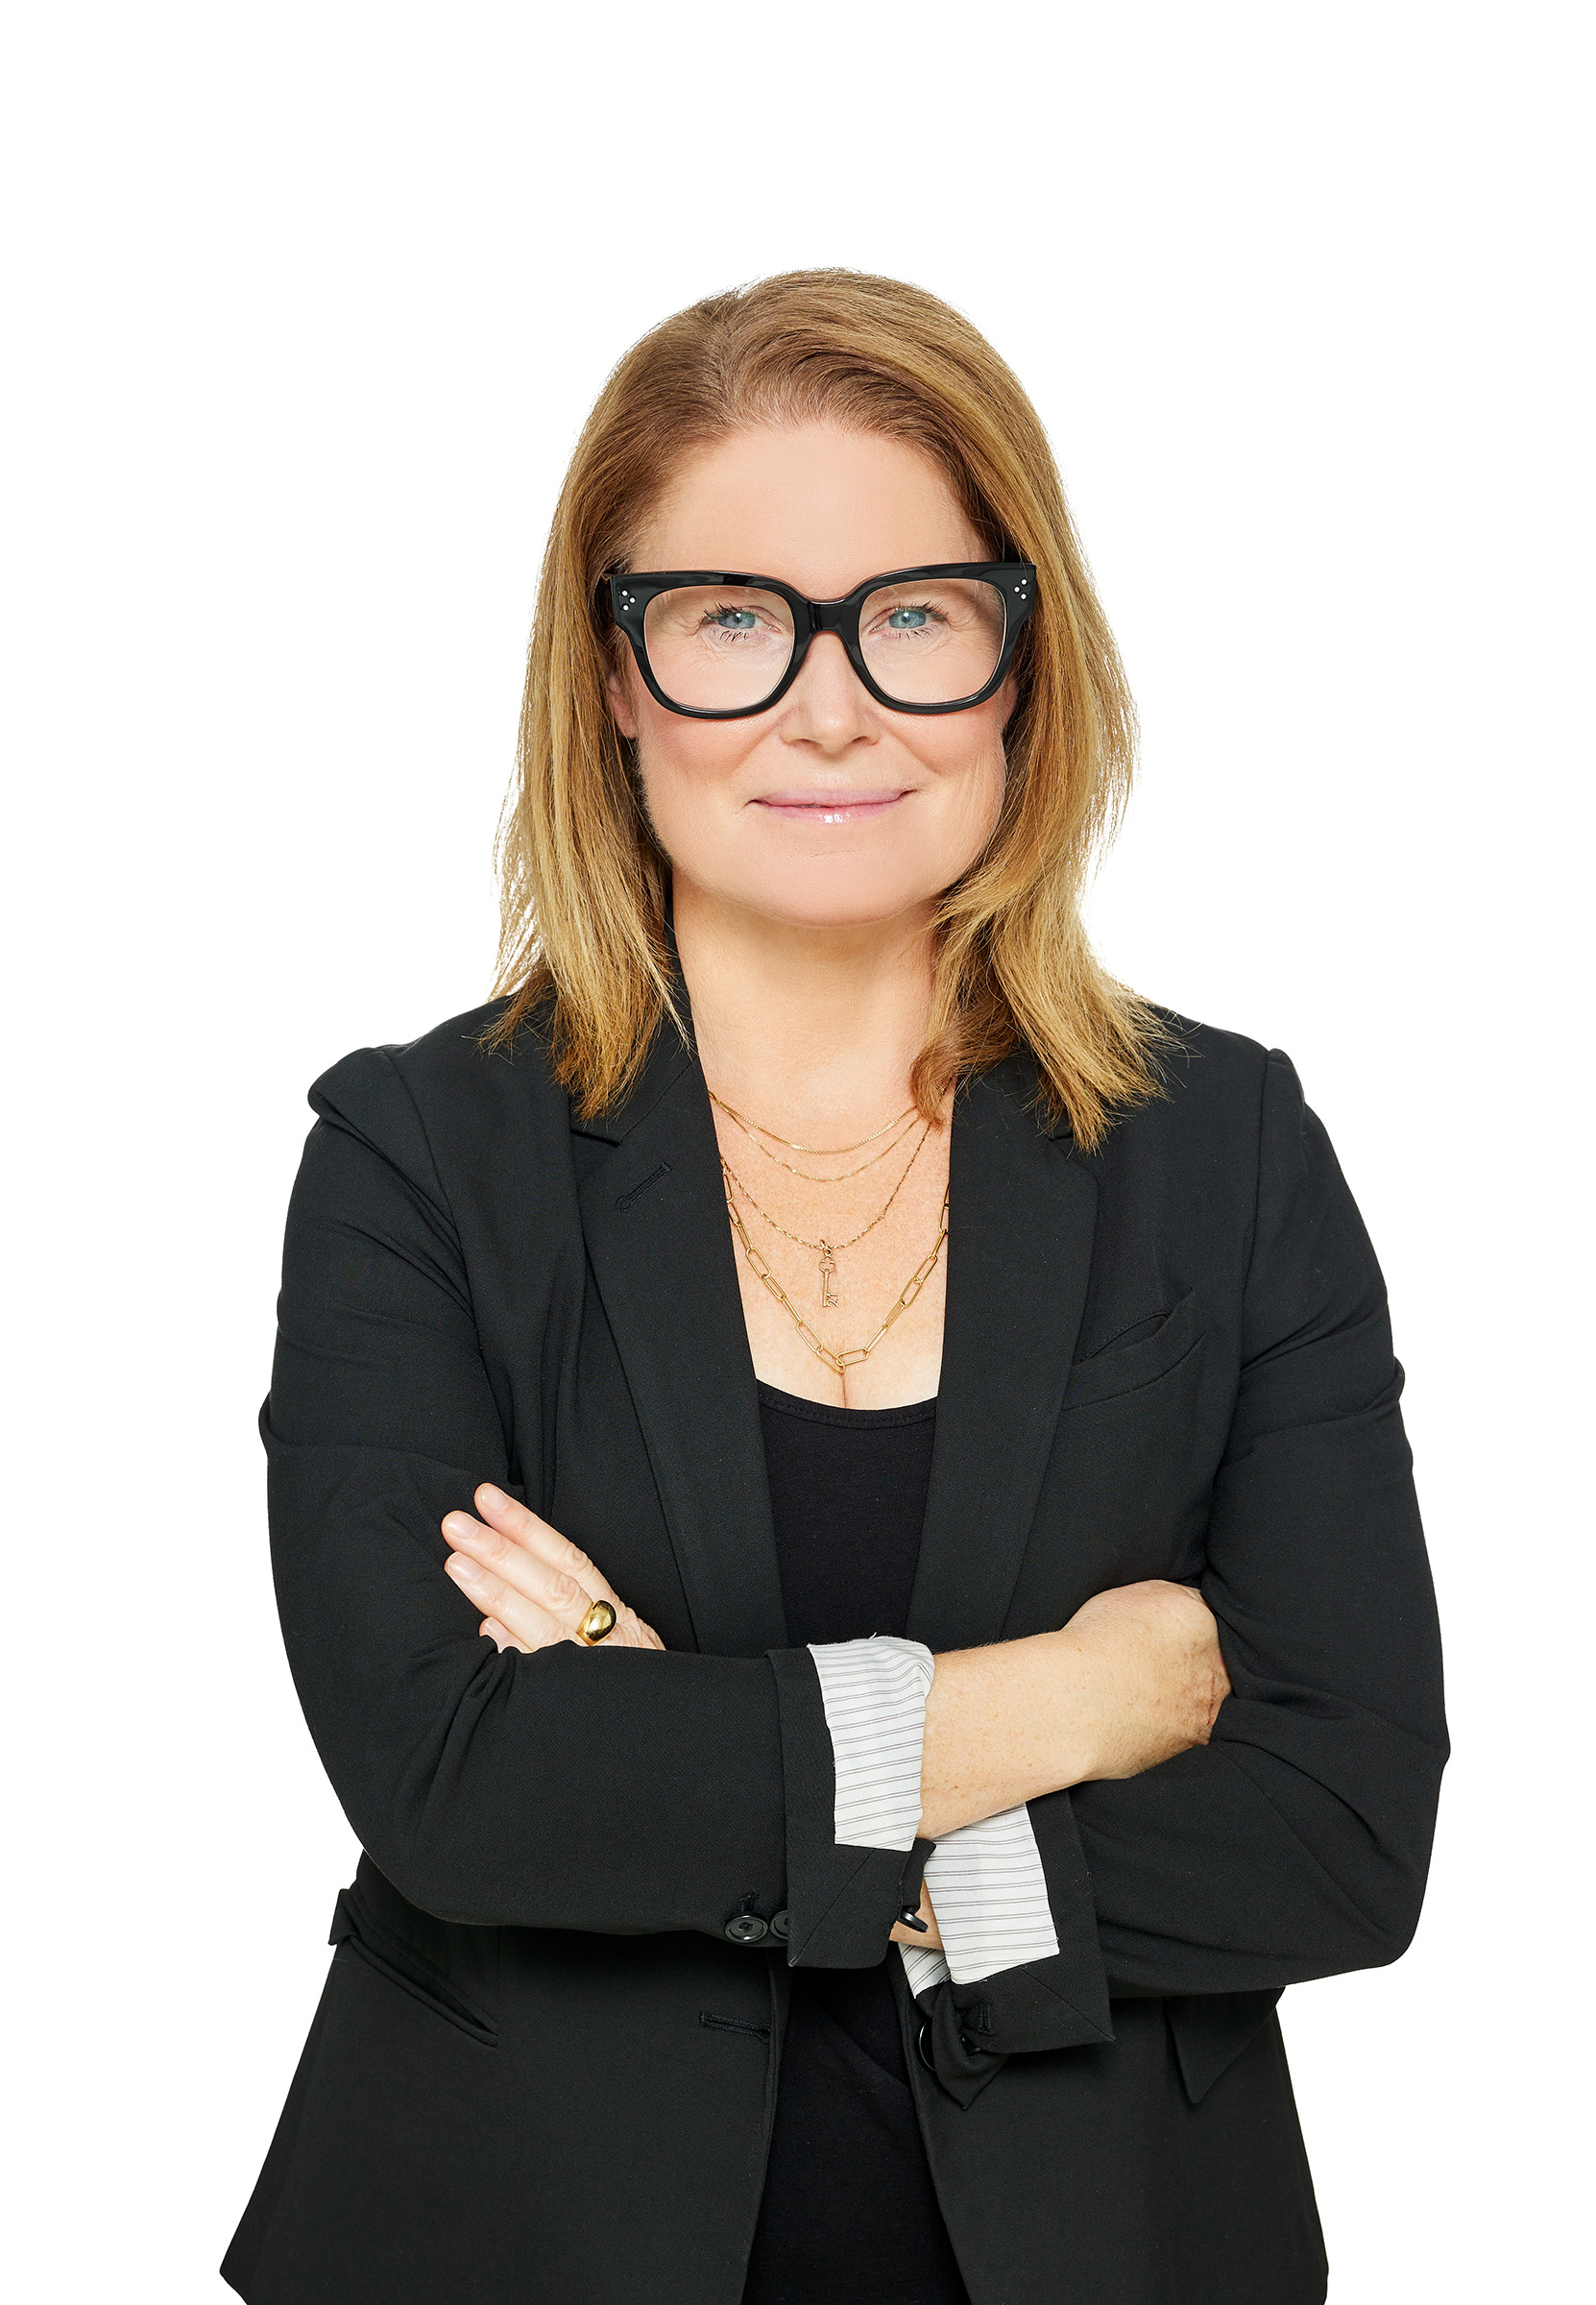 A woman in glasses posing for an event photography photo.